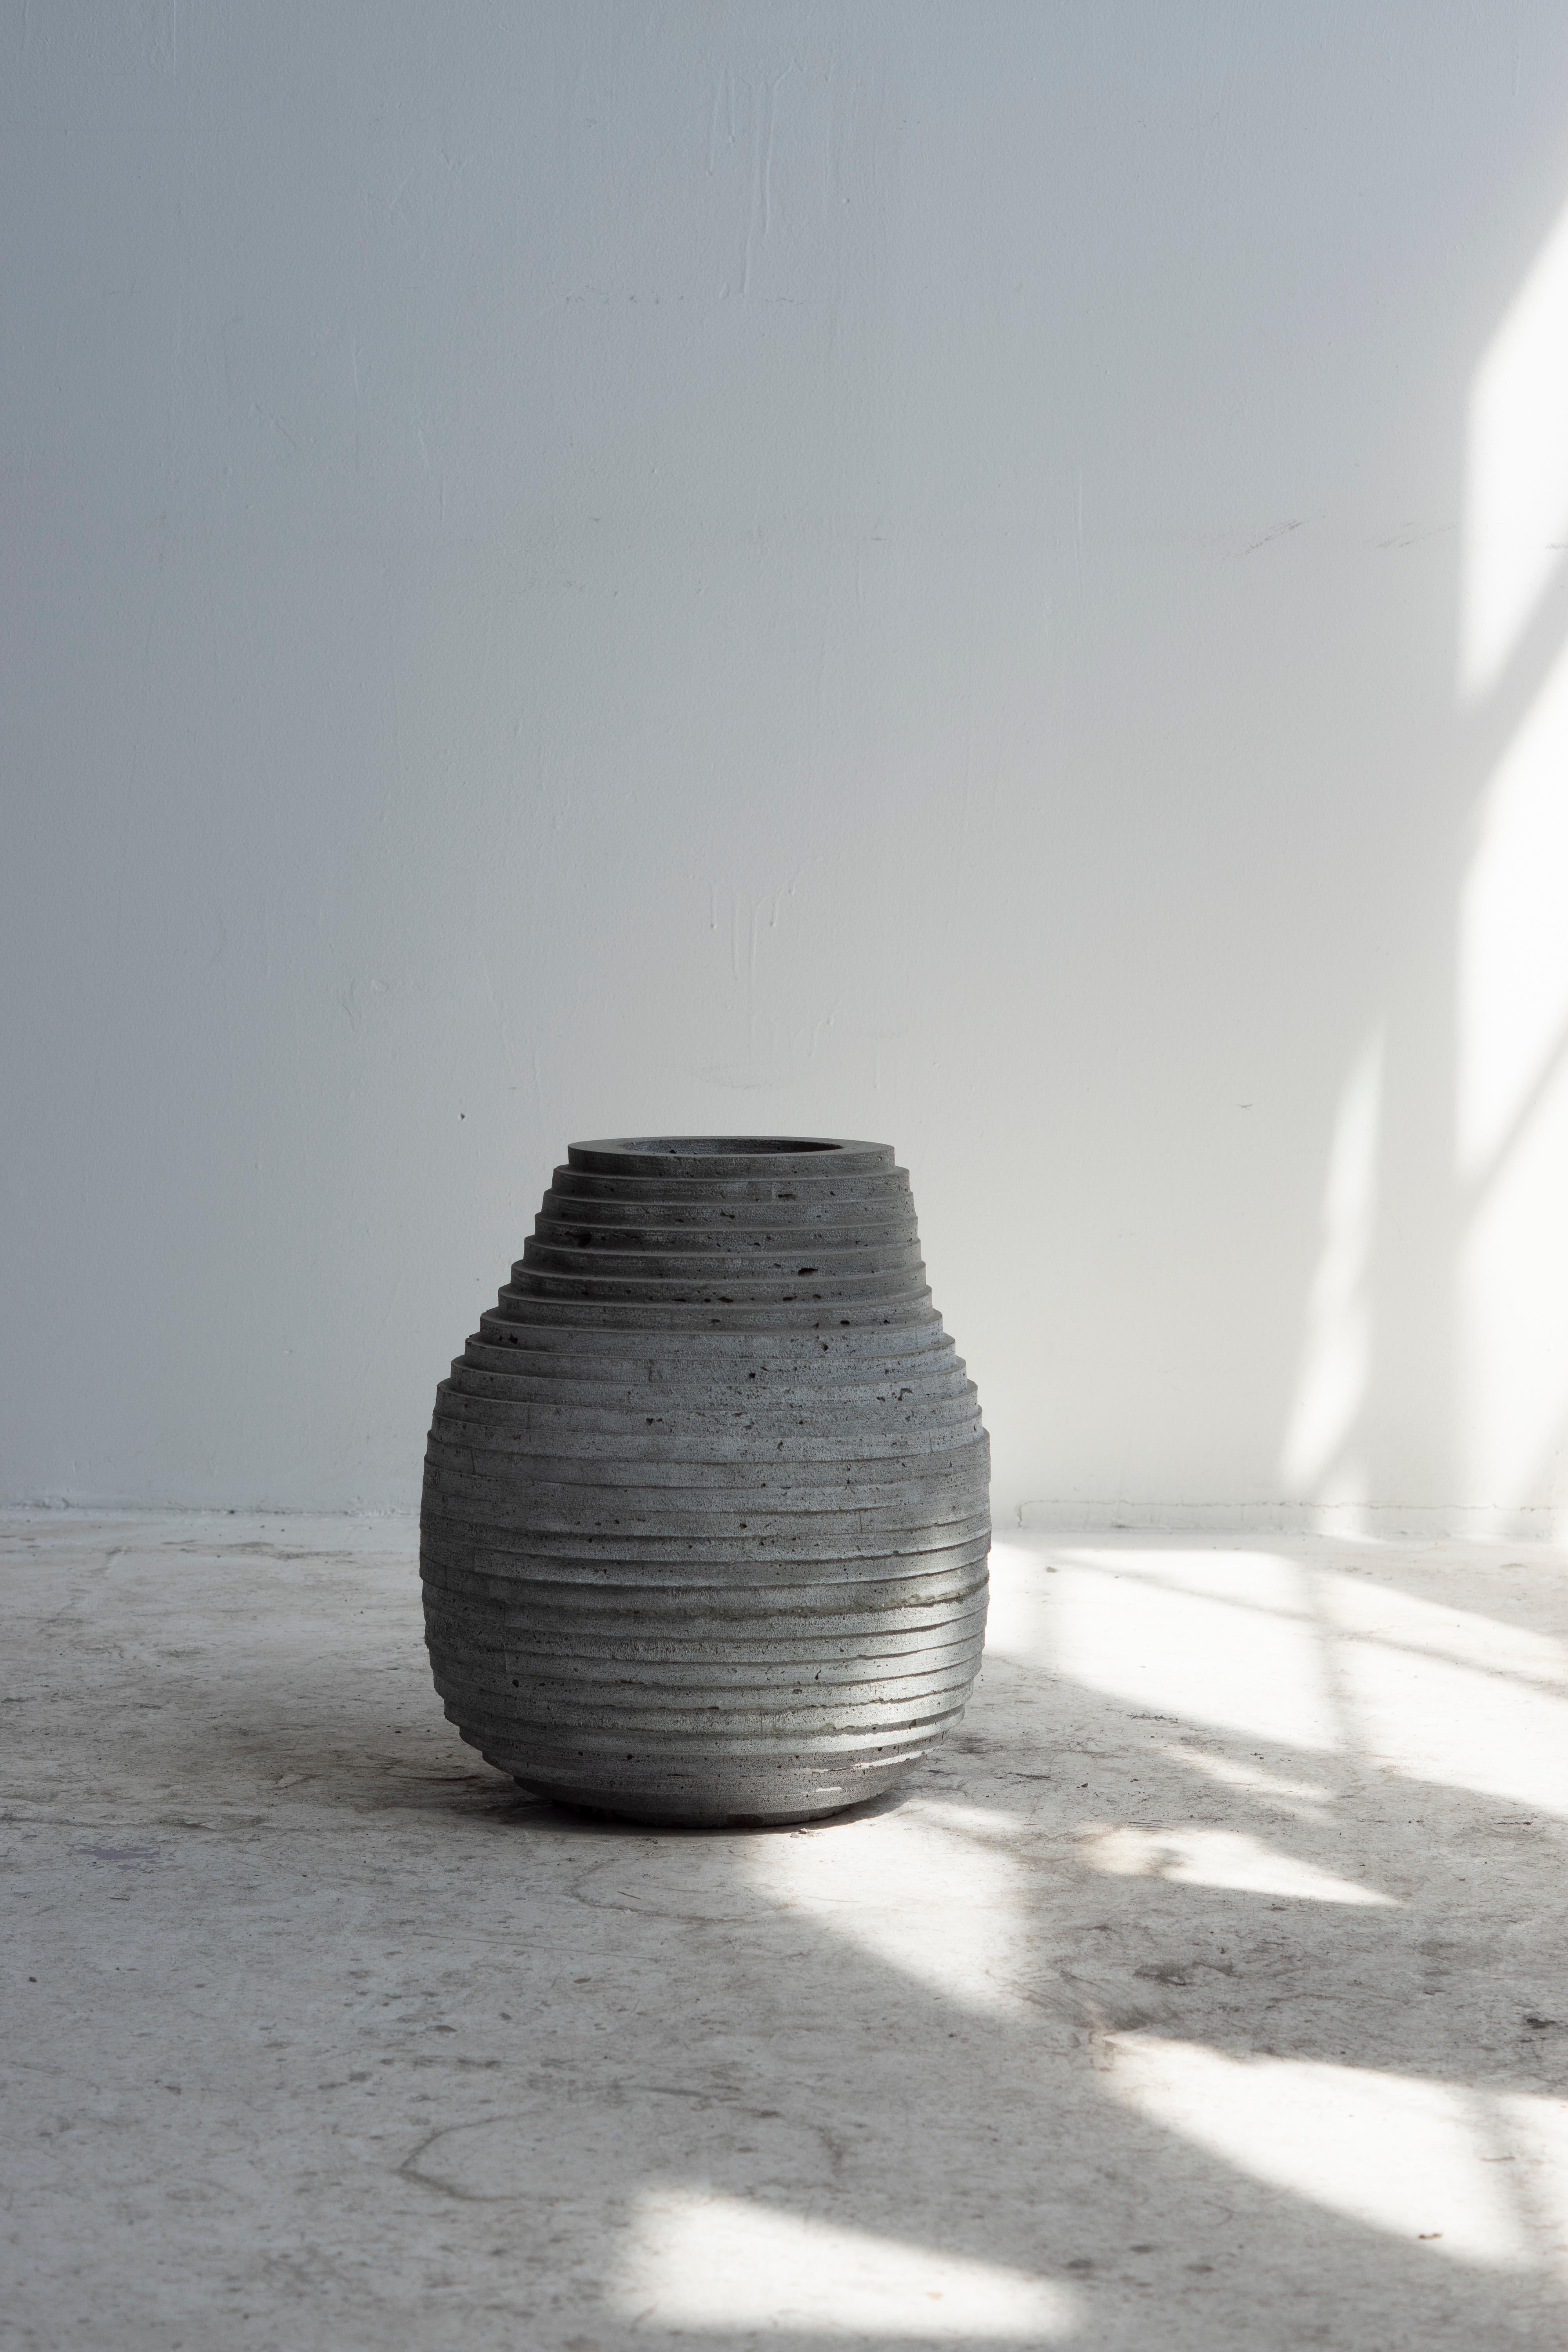 Hand-cast vessel for indoor and outdoor use. Drainage holes can be added.

At the intersection of art, craft, and design, Concrete Poetics' debut collection of hand-cast cement sculptural furniture and accessories streamlines visually intriguing and